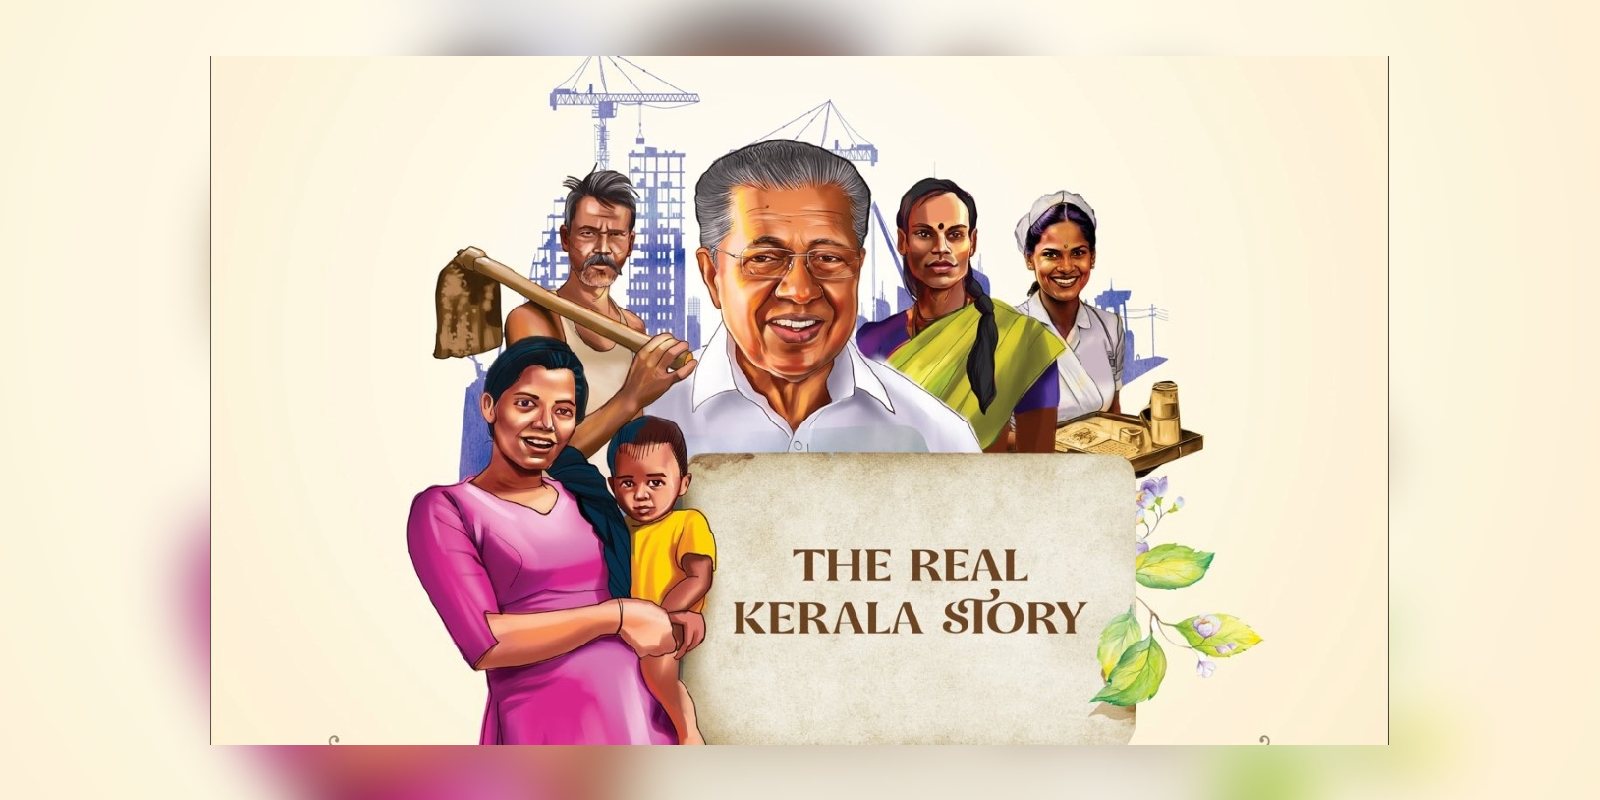 The Real Kerala Story ads